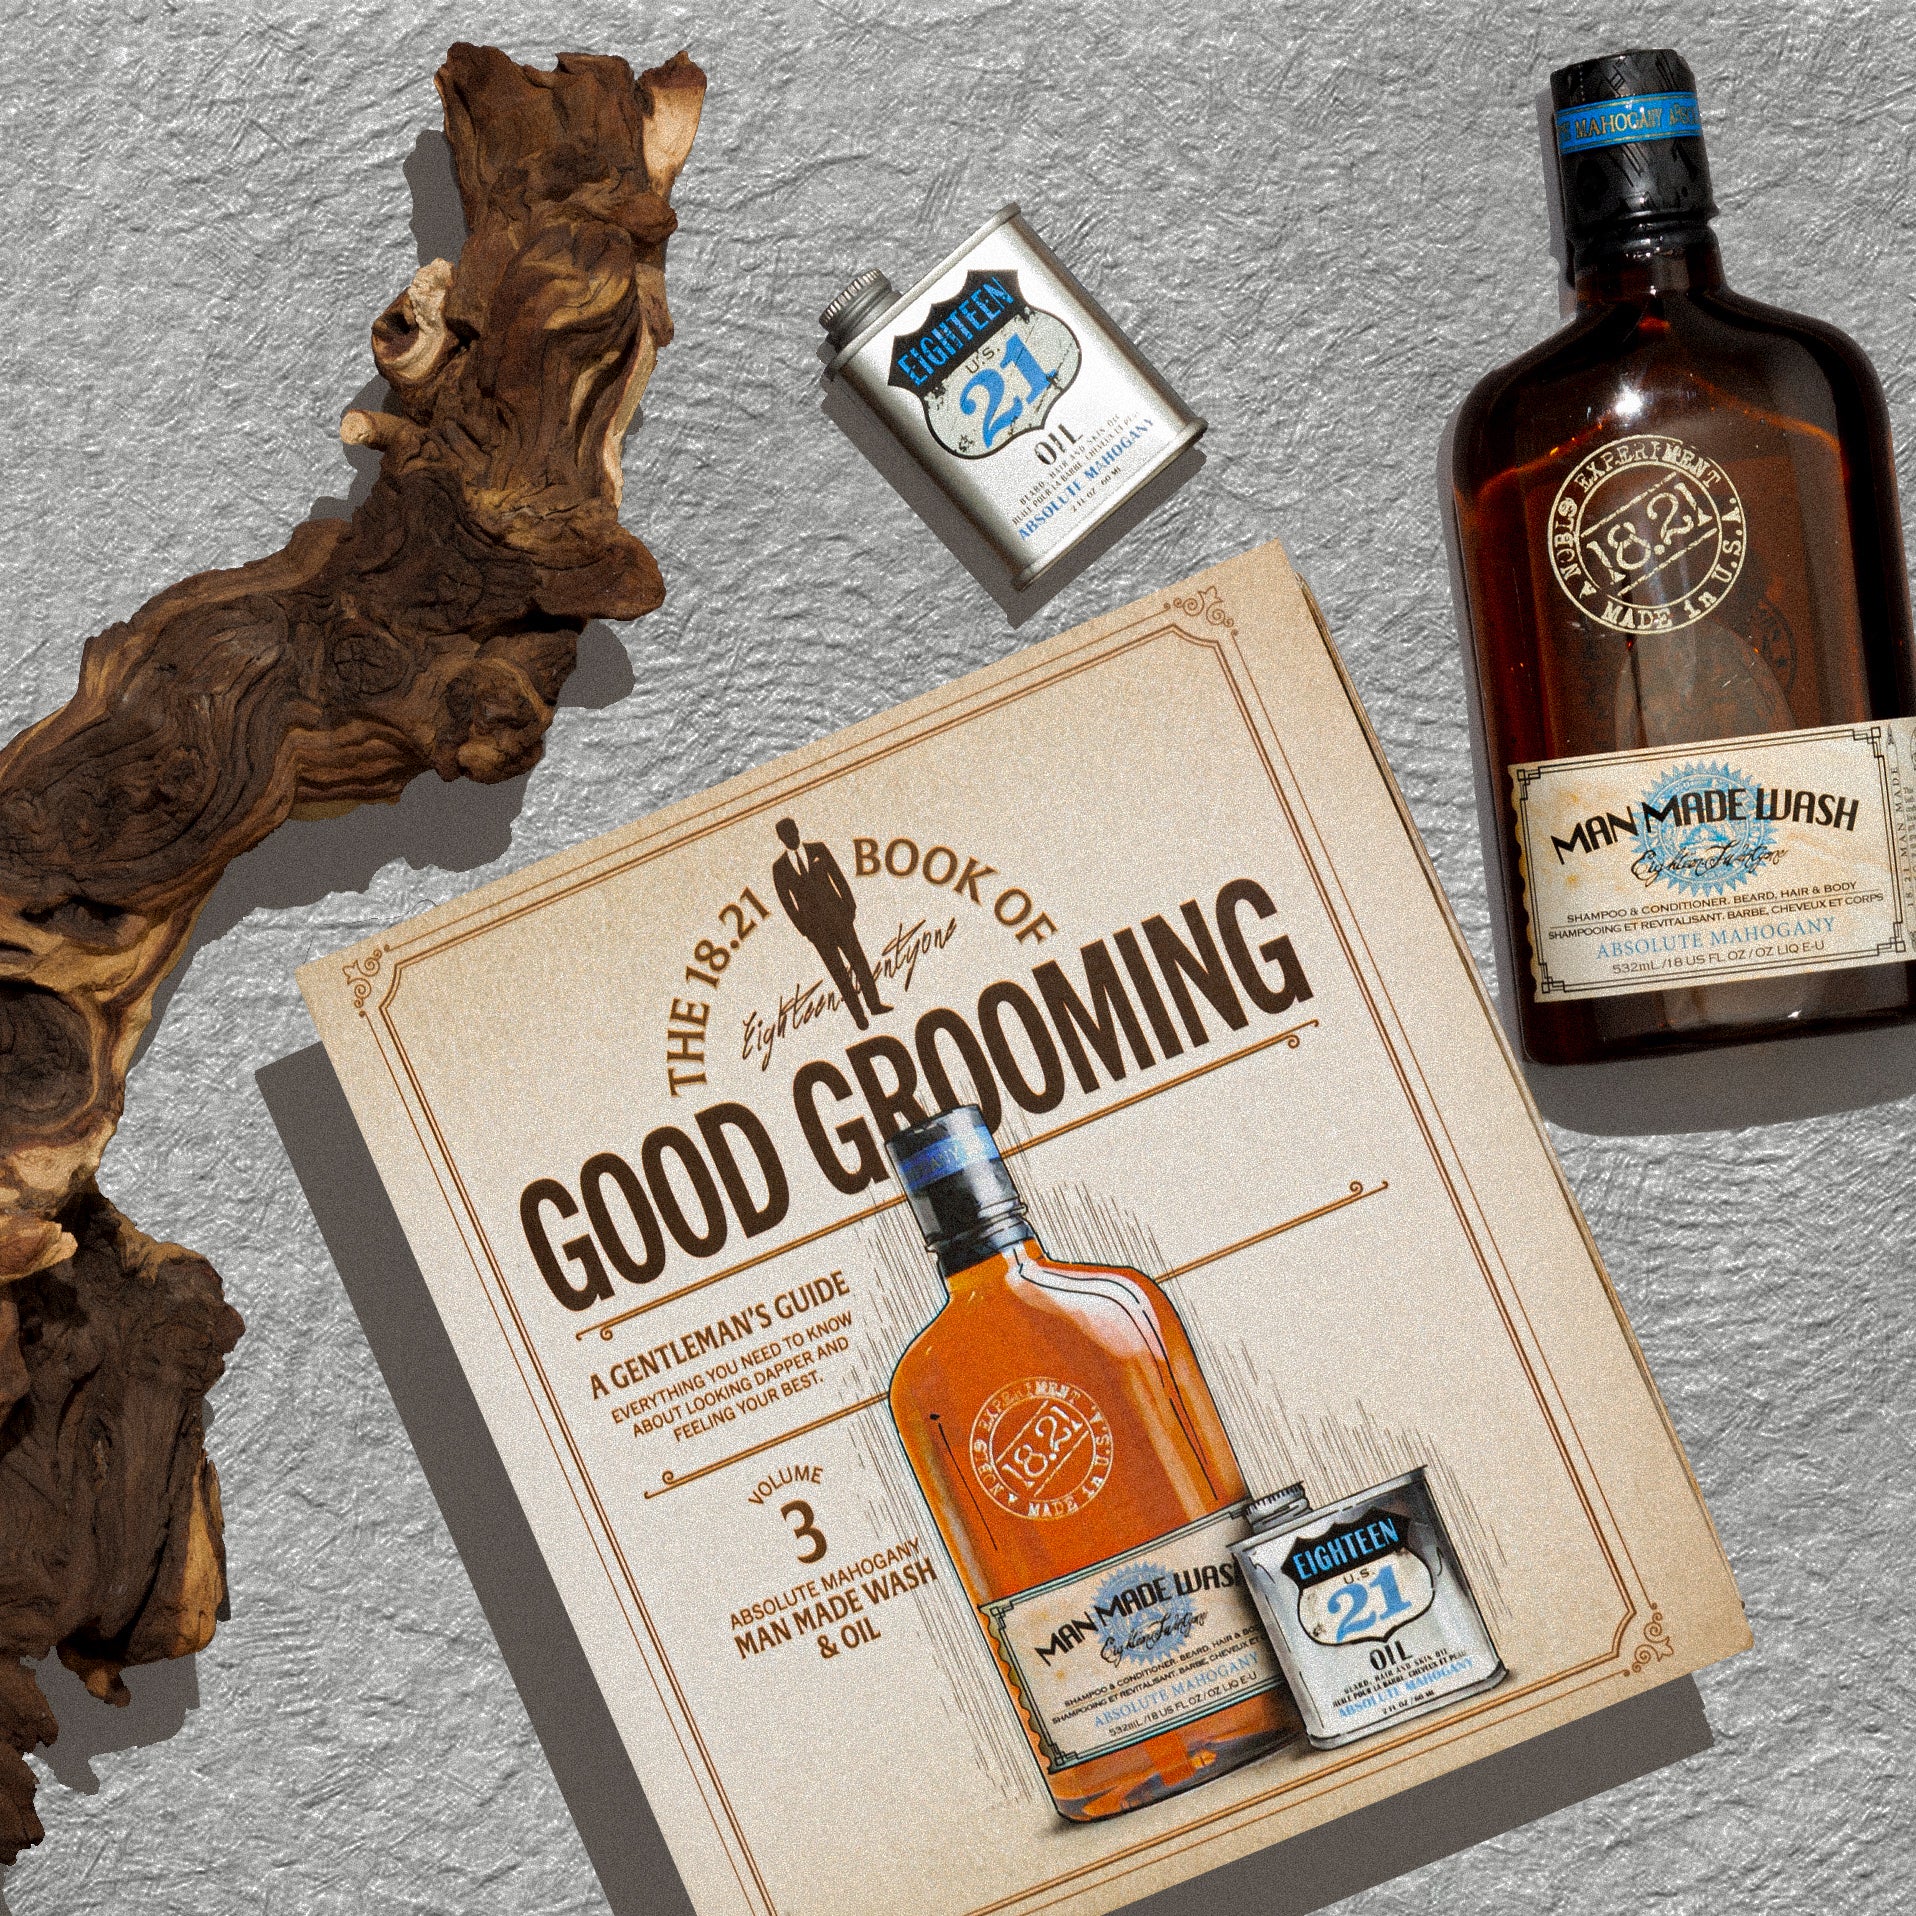 18.21 Man Made Book of Good Grooming Volume 3 Giftset: 18oz Man Made Wash and Hair, Beard, Skin oil in Absolute Mahogany scent.